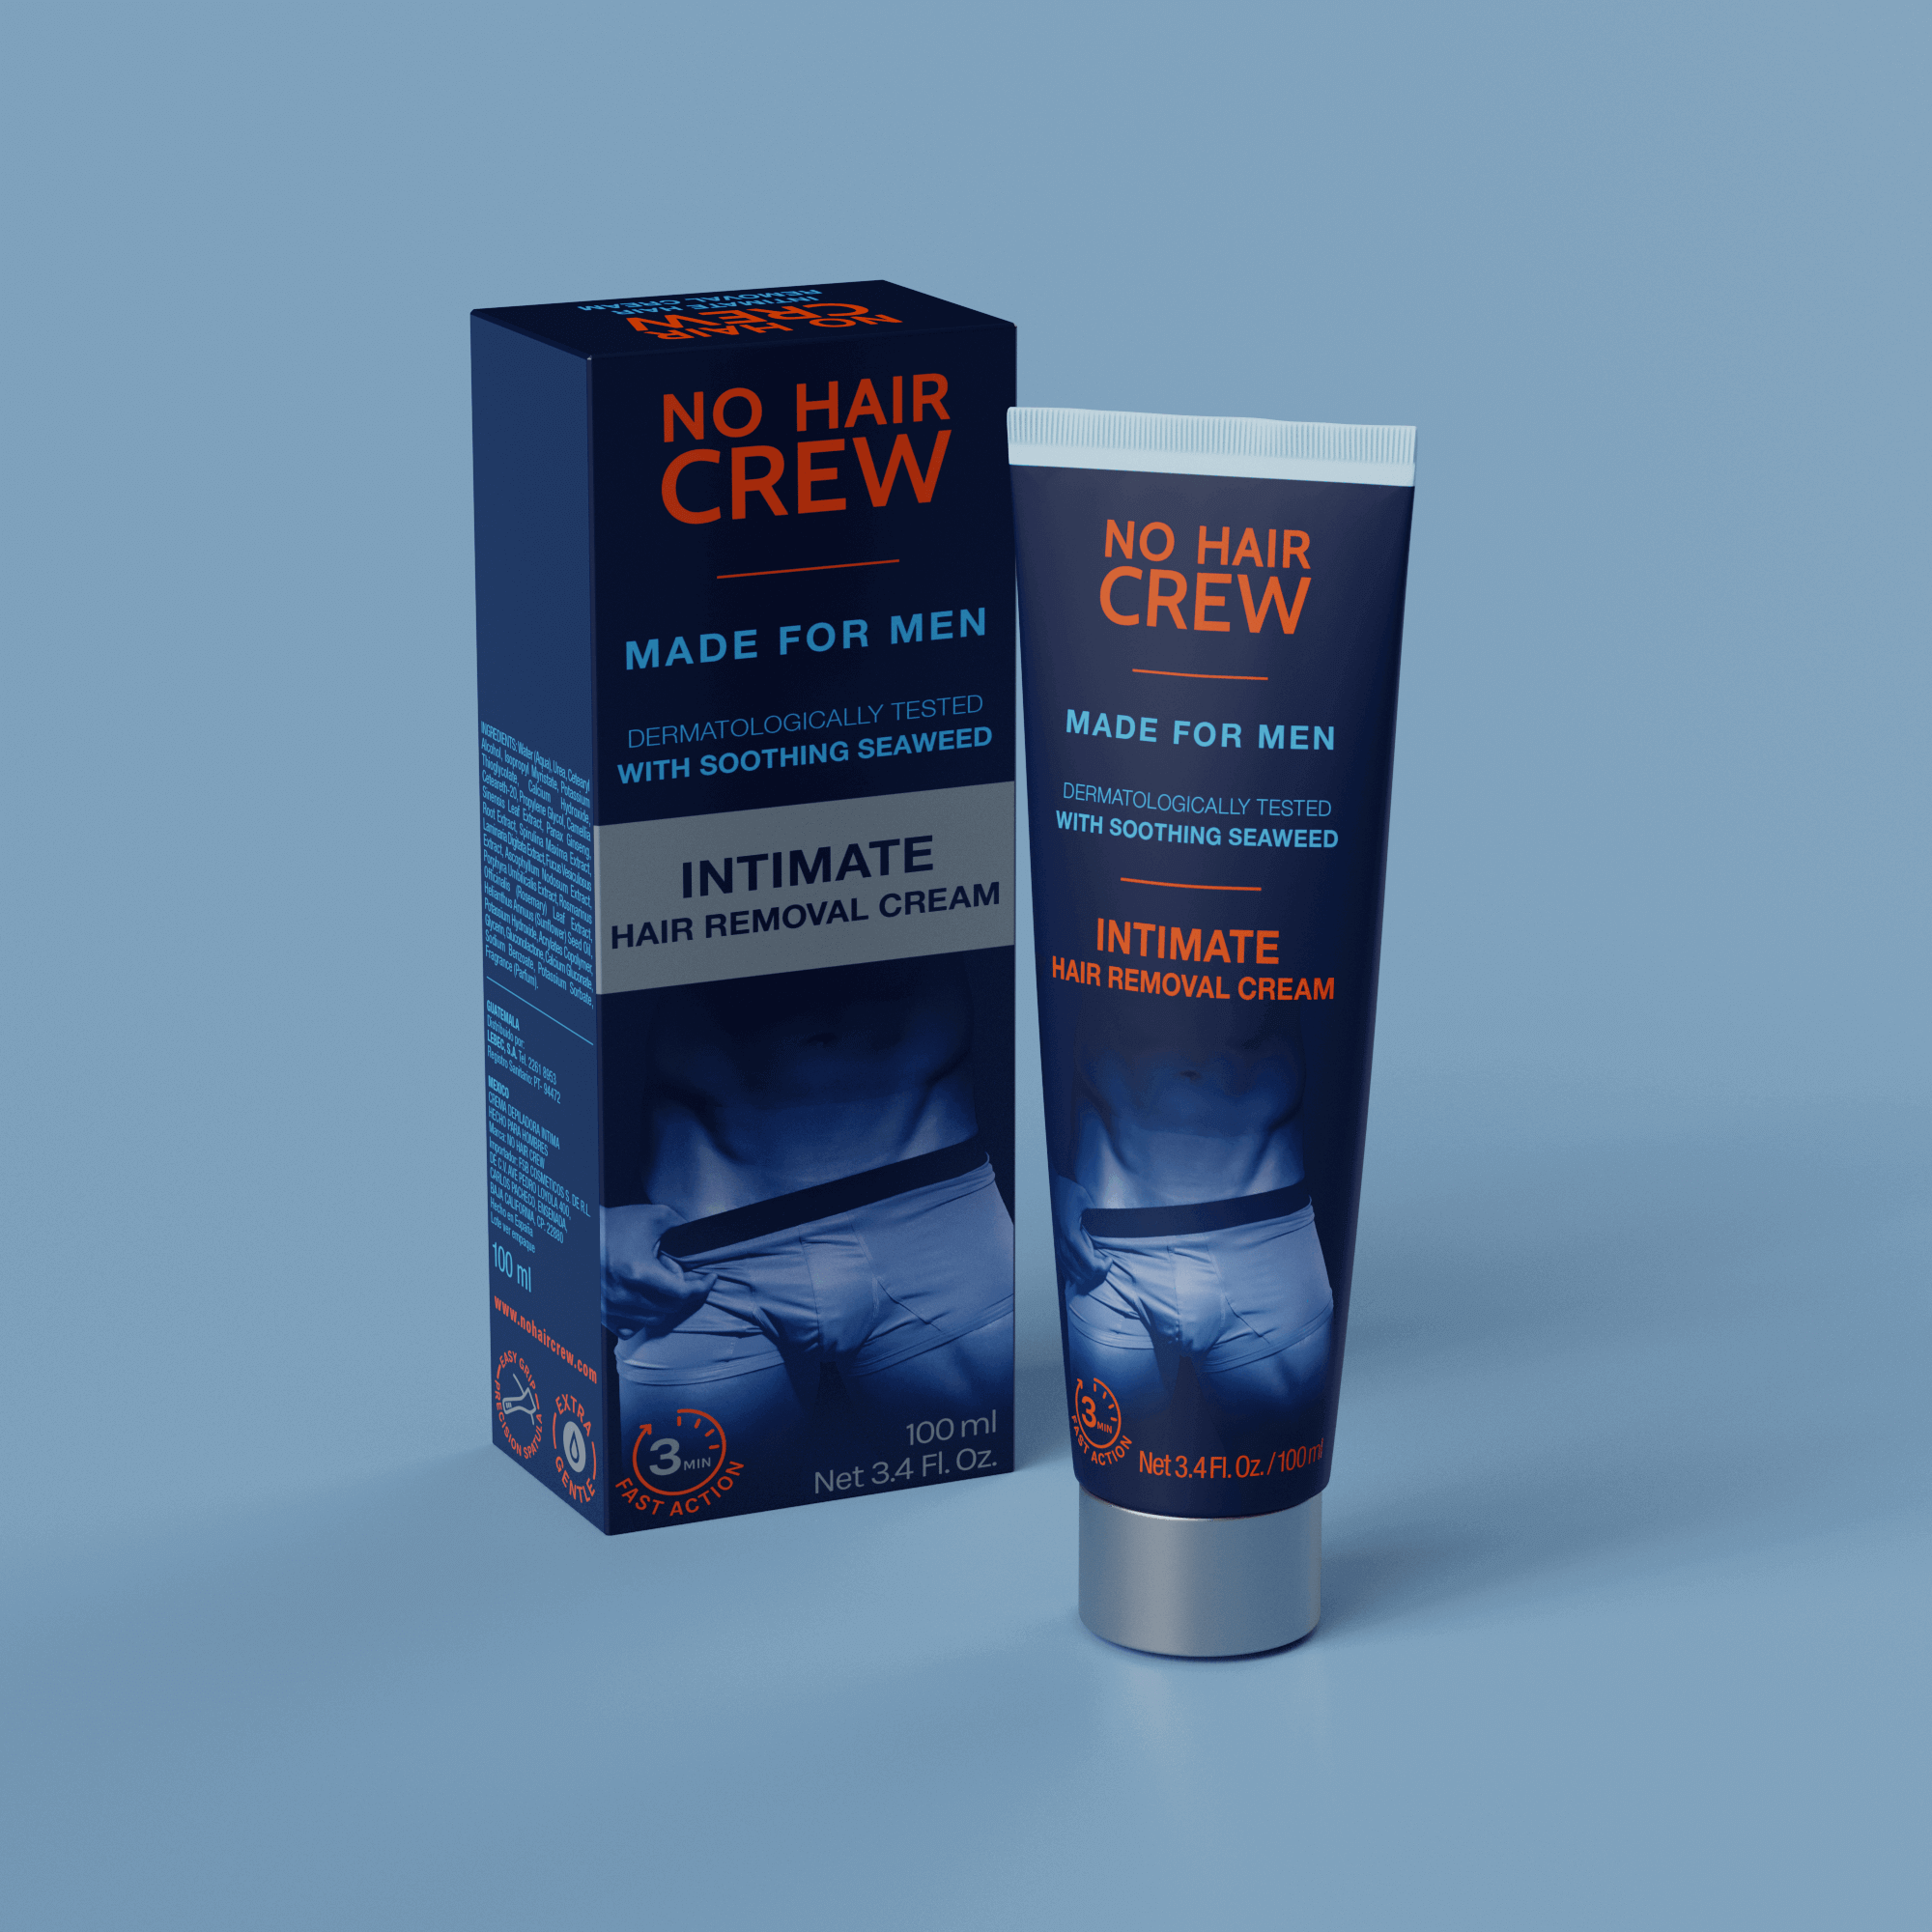 INTIMATE Hair Removal Cream